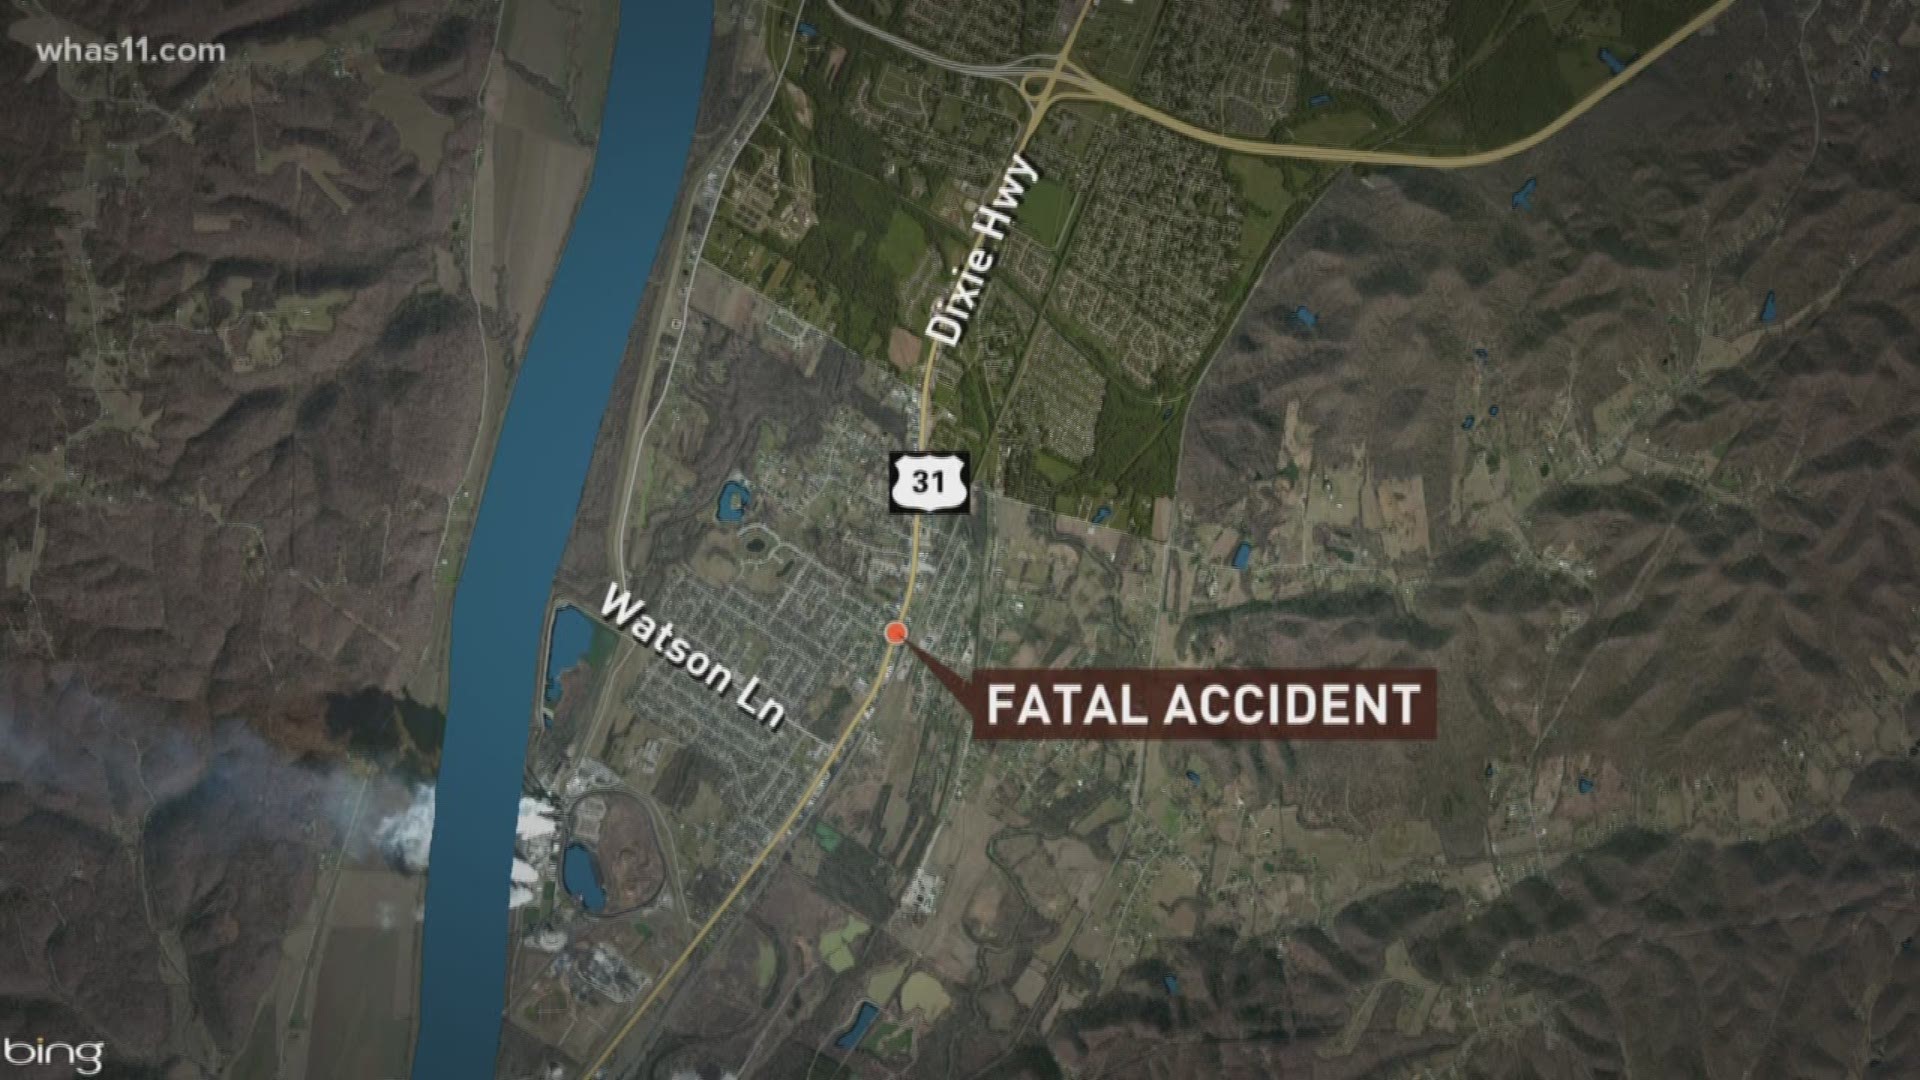 Woman hit, killed while on bike, police say